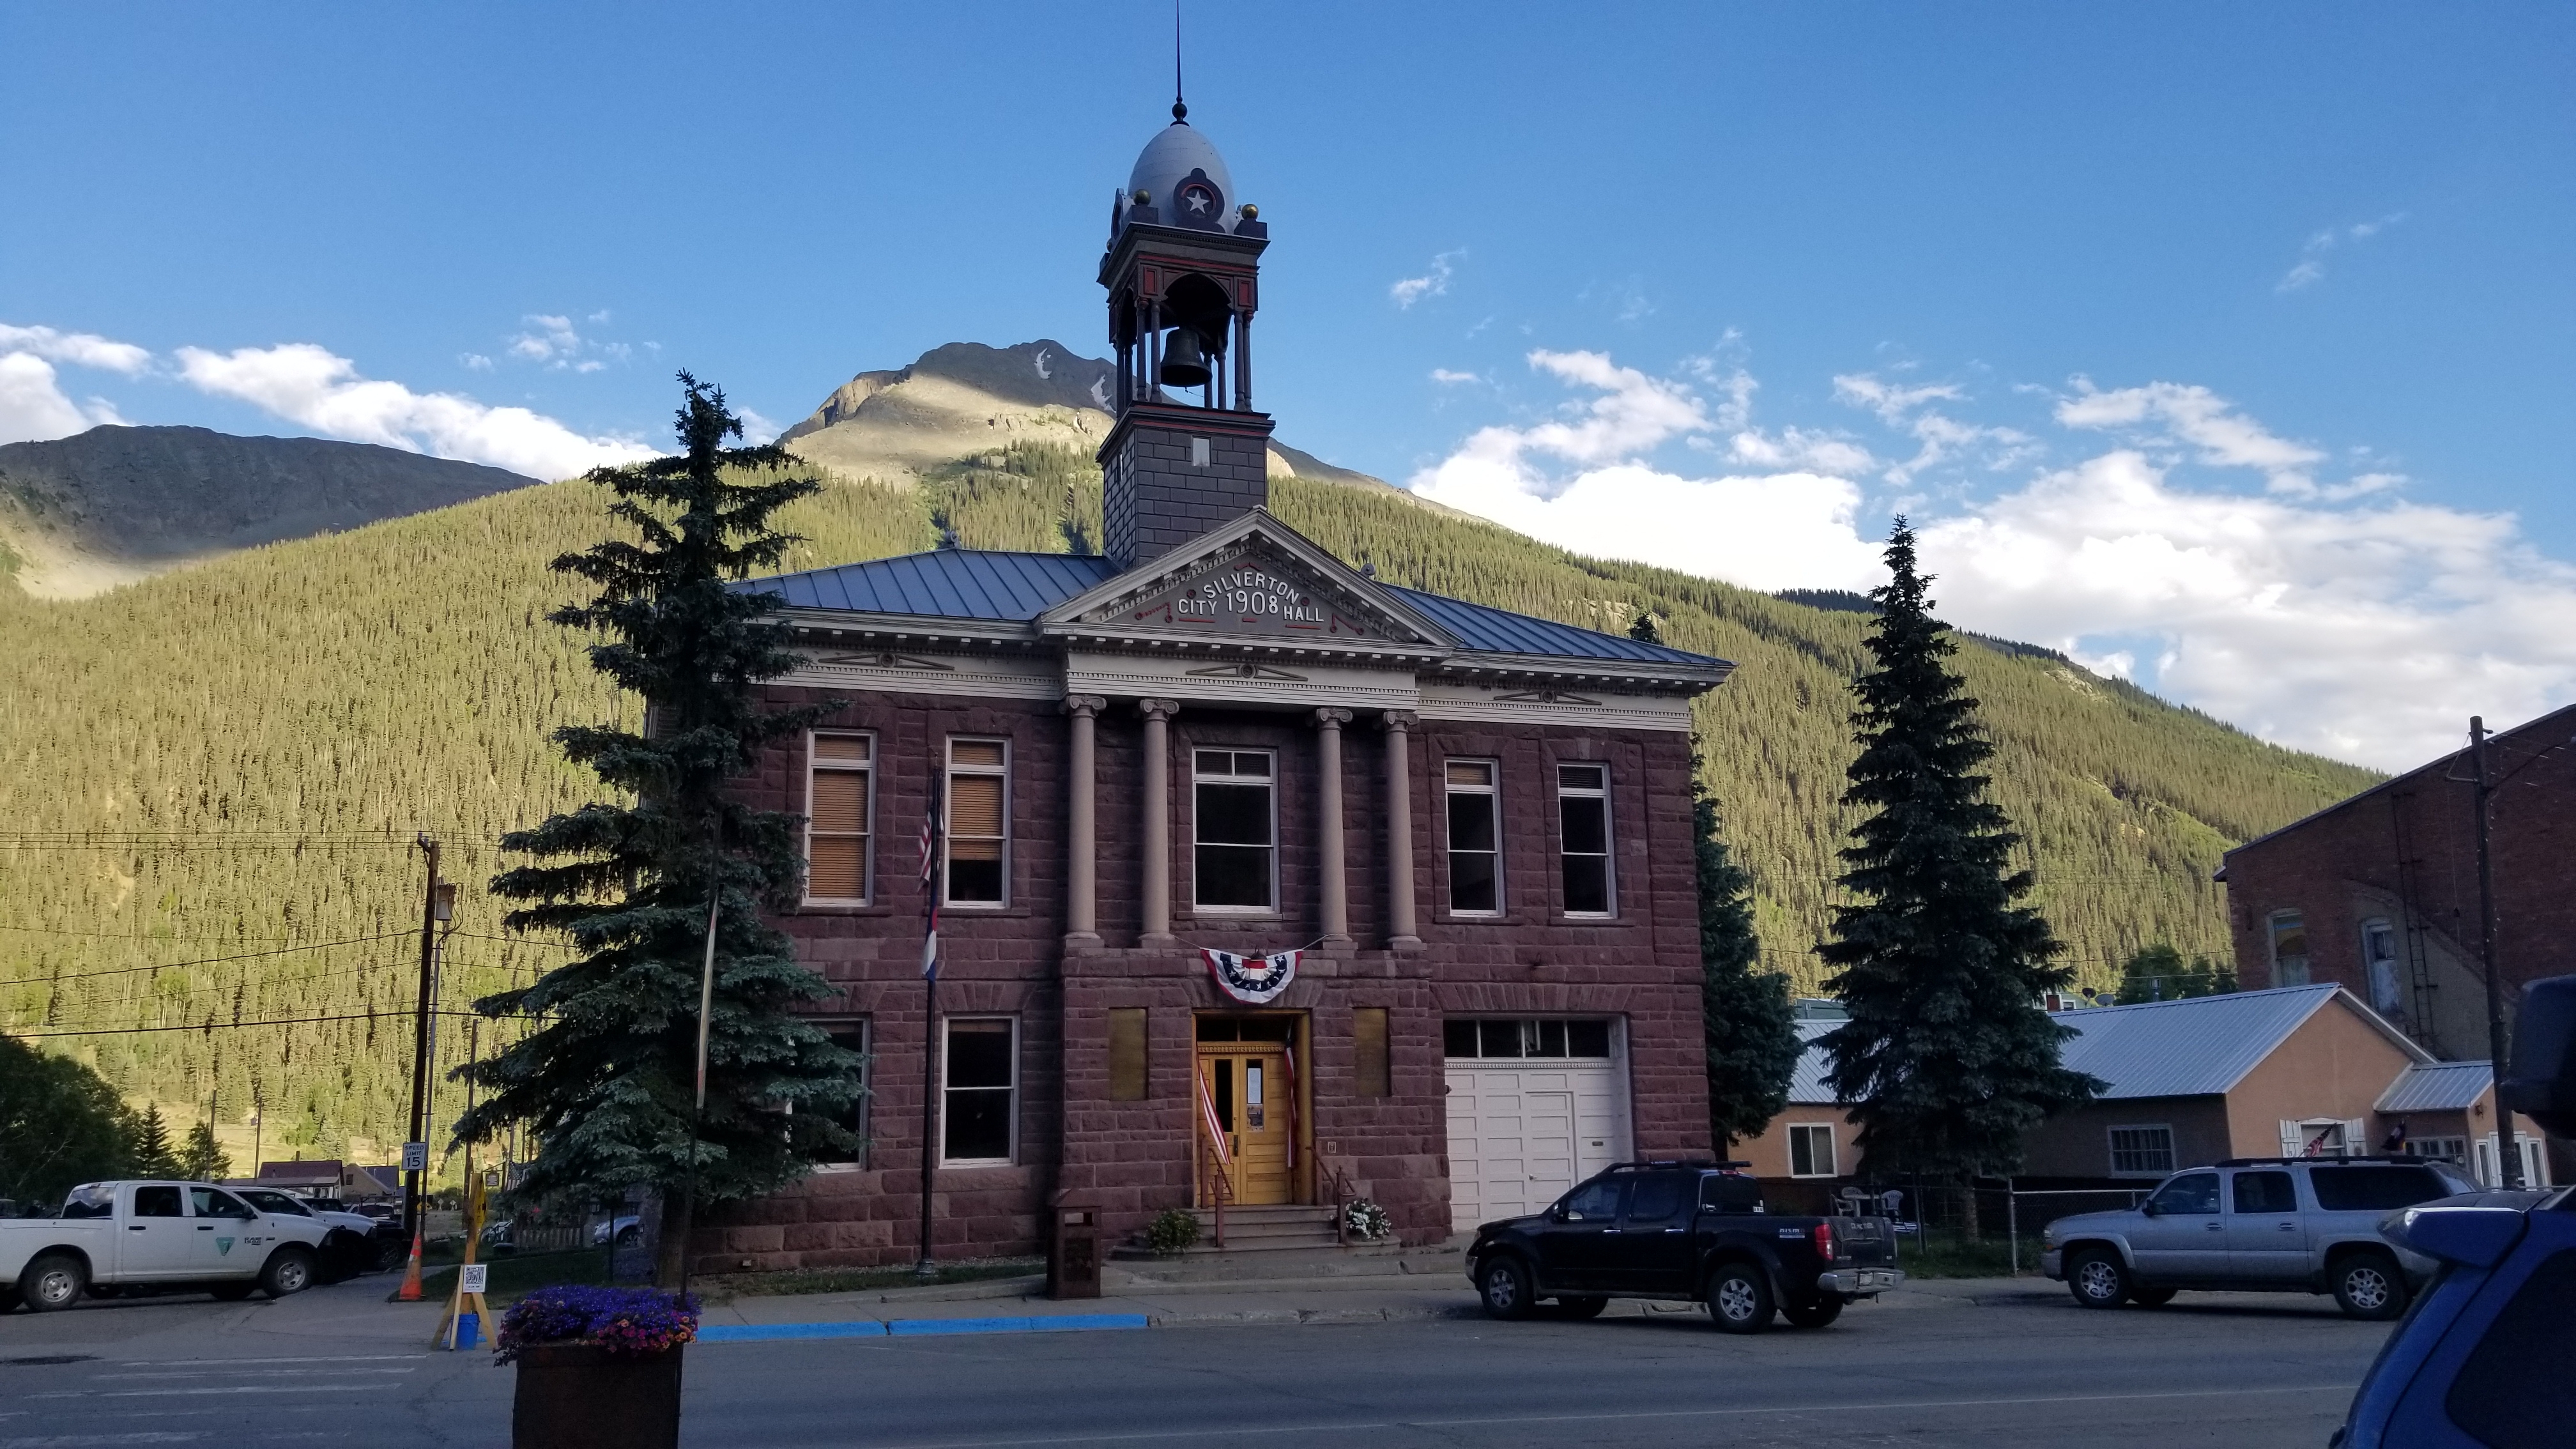 The Silverton Town Hall